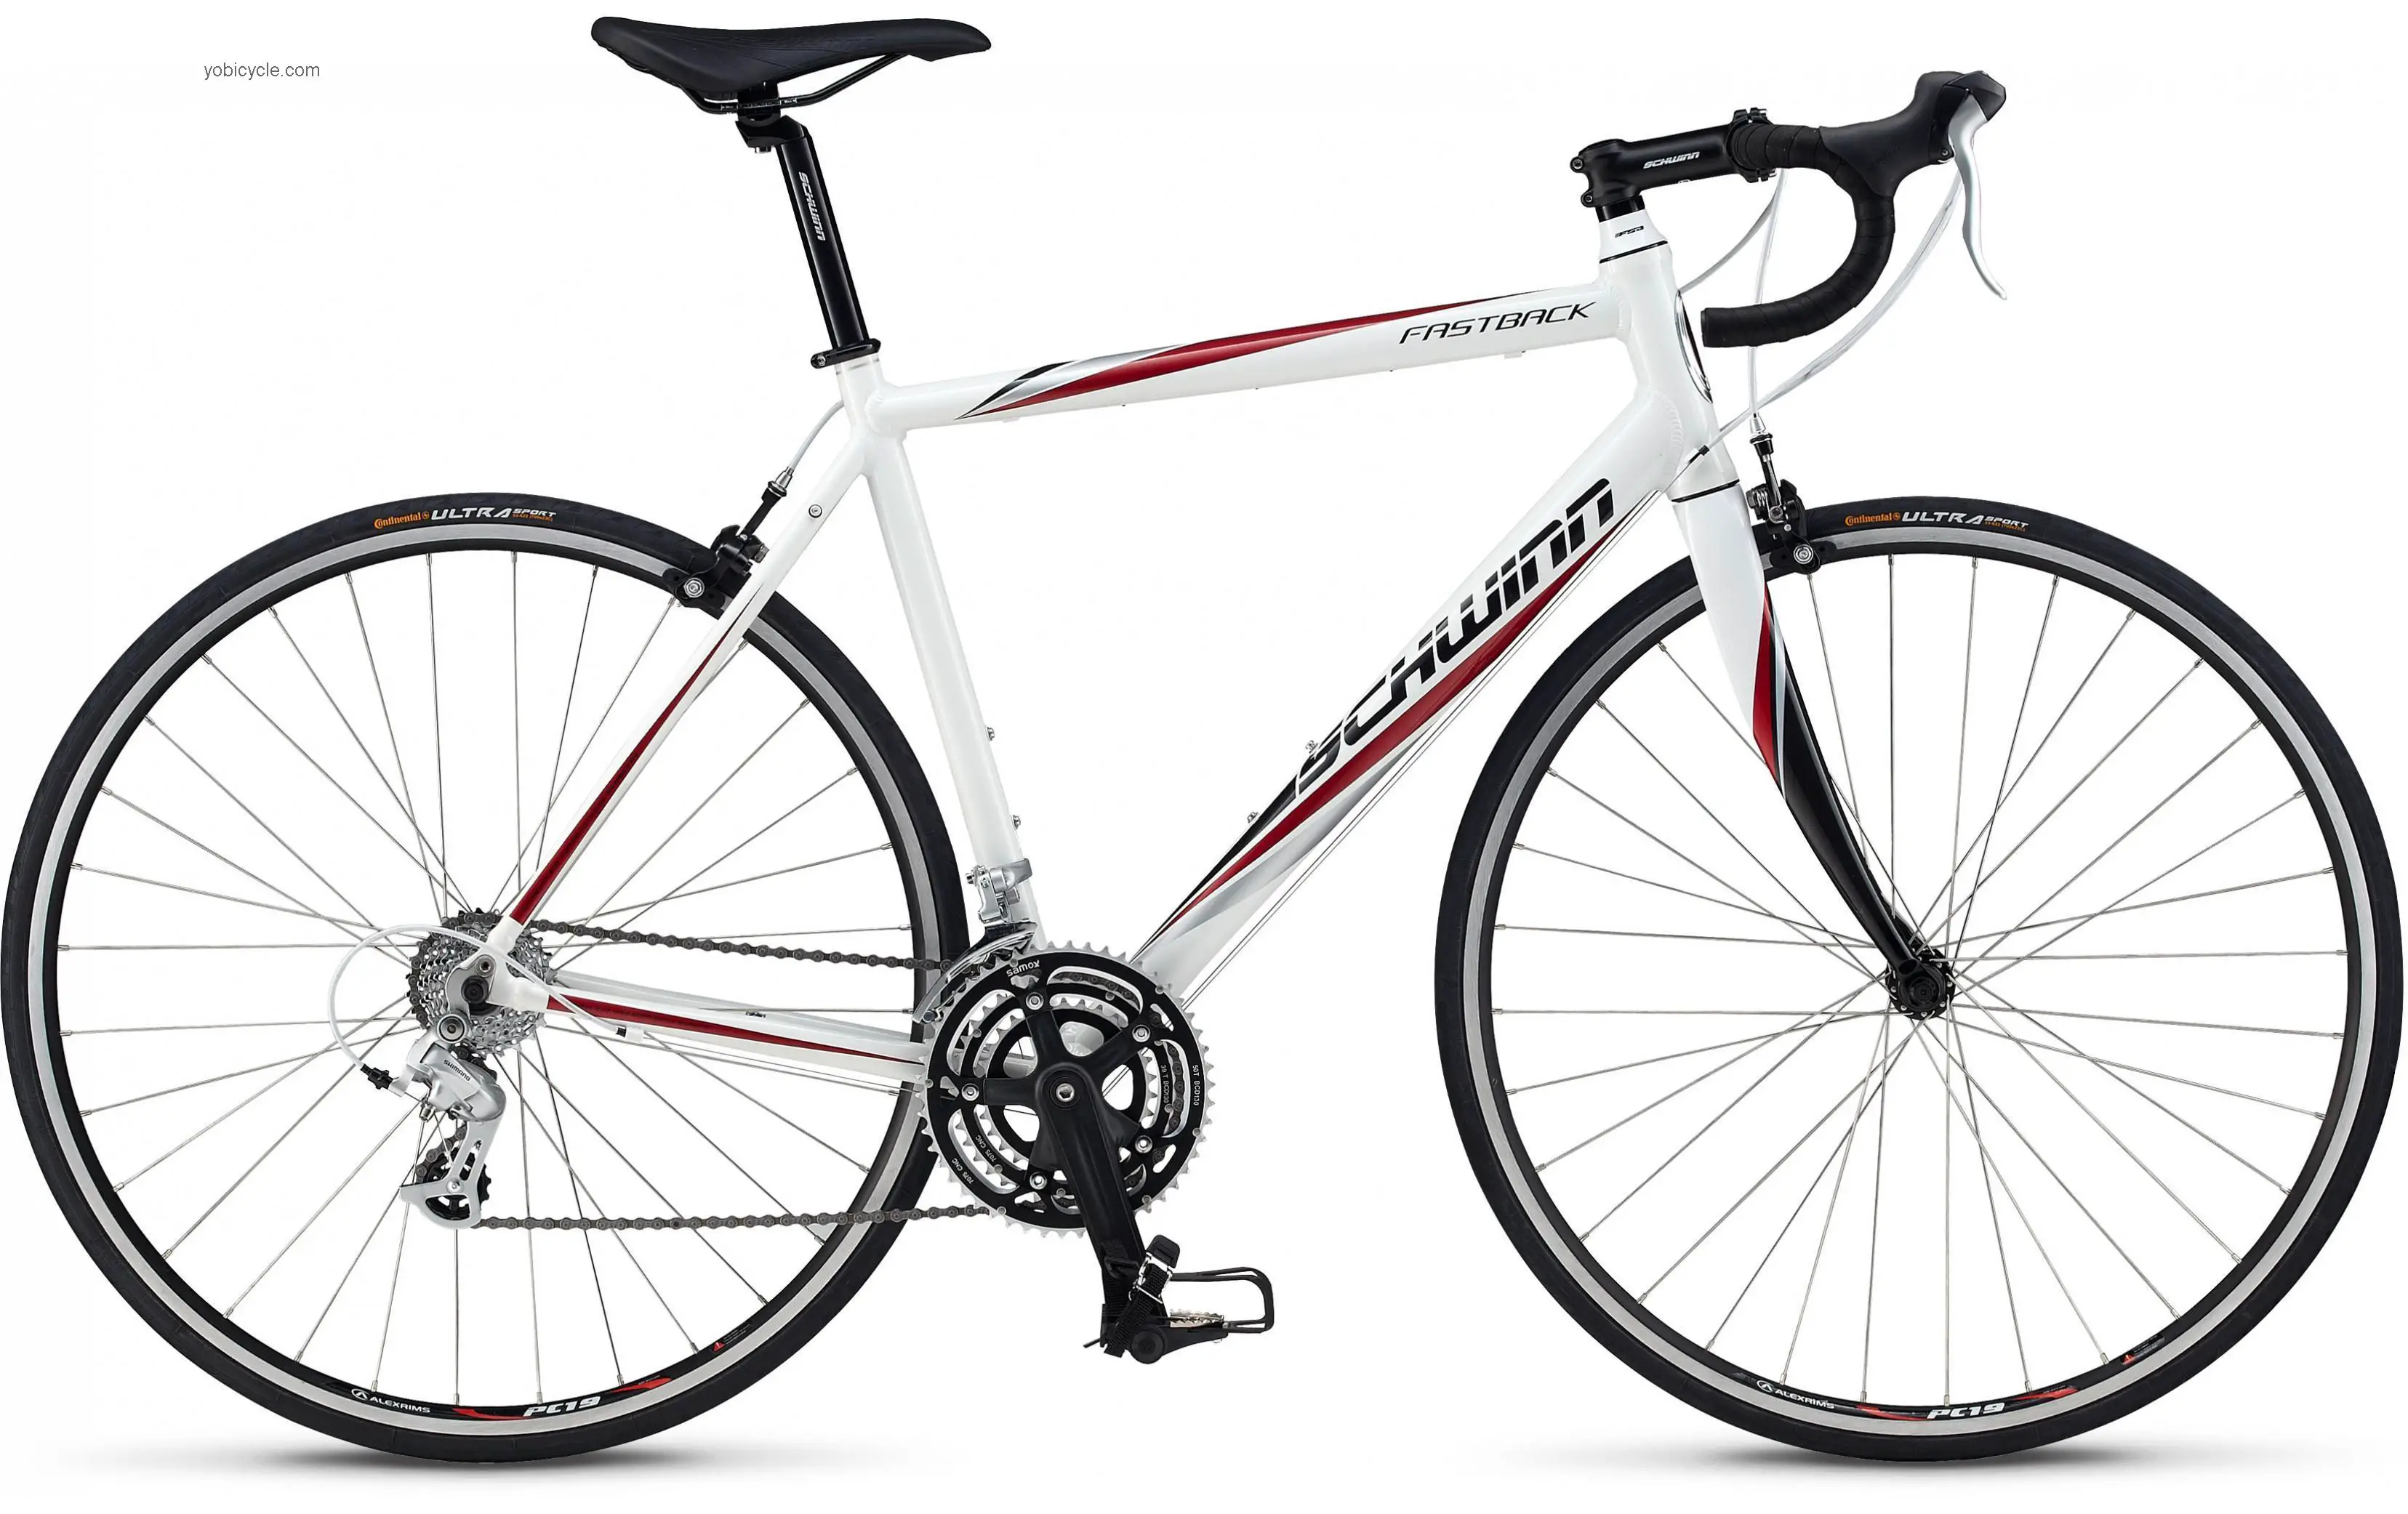 Schwinn Fastback competitors and comparison tool online specs and performance